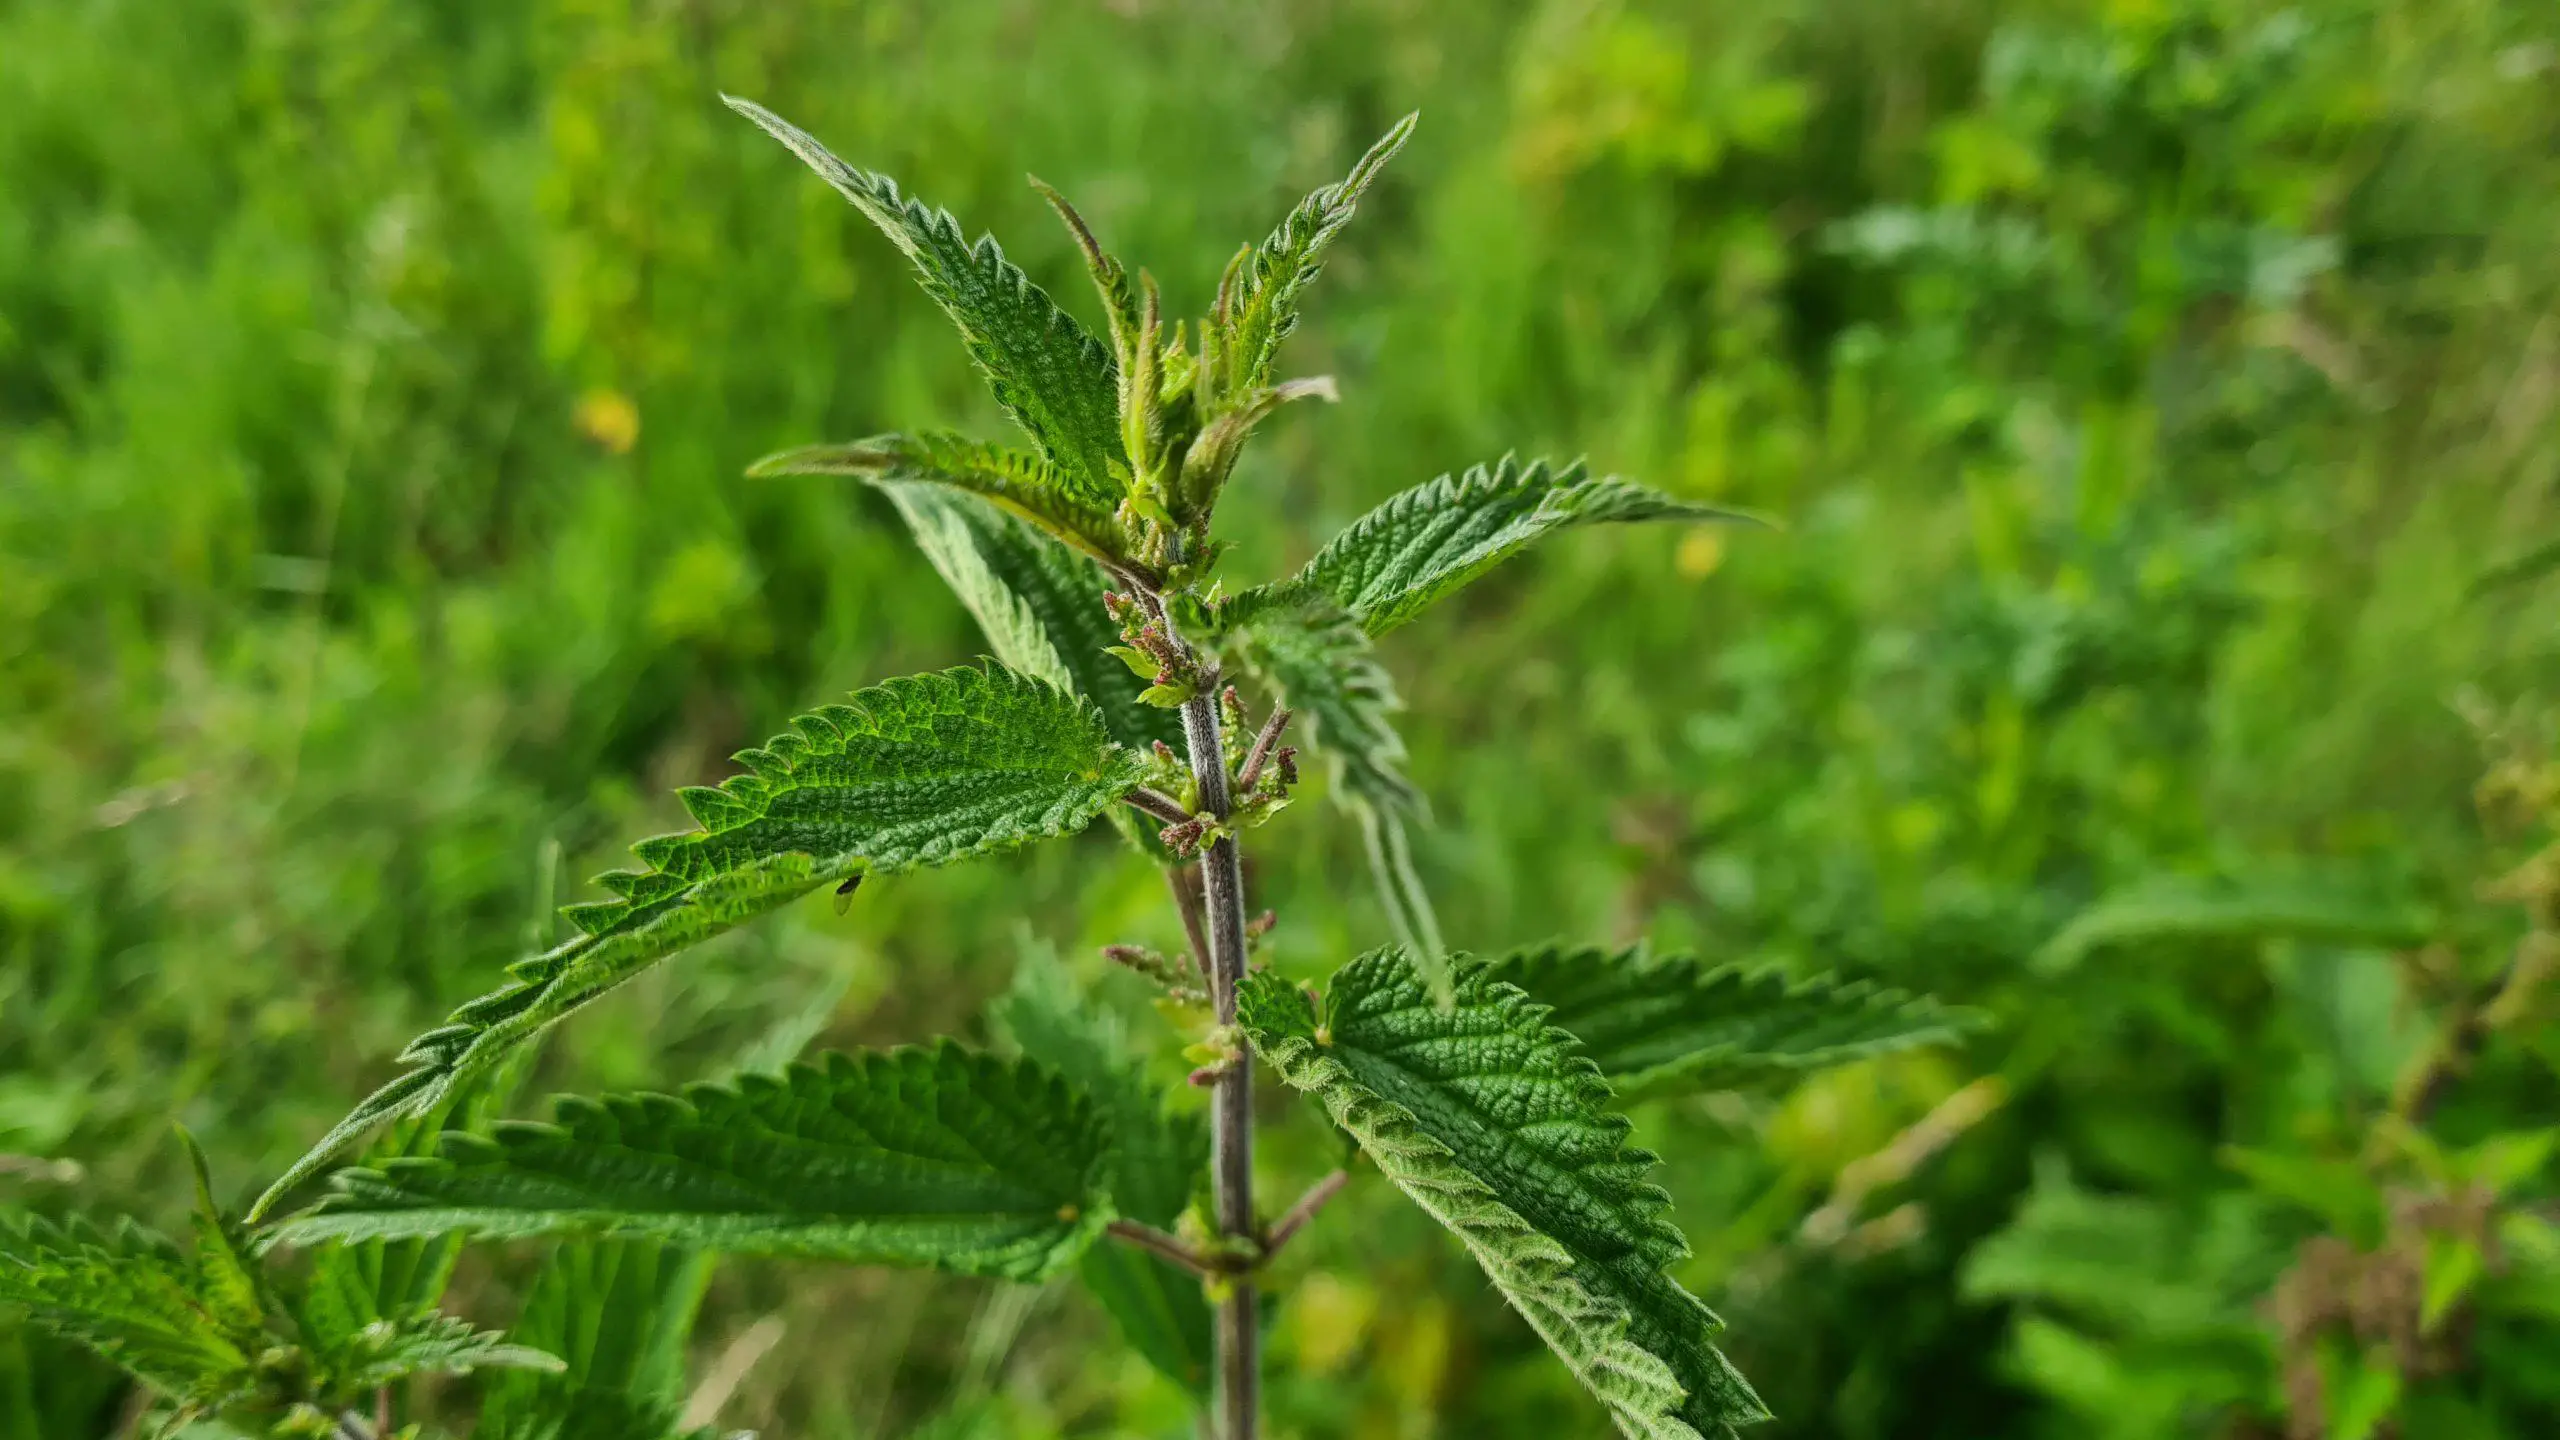 Common nettles maturing as they develop within a garden